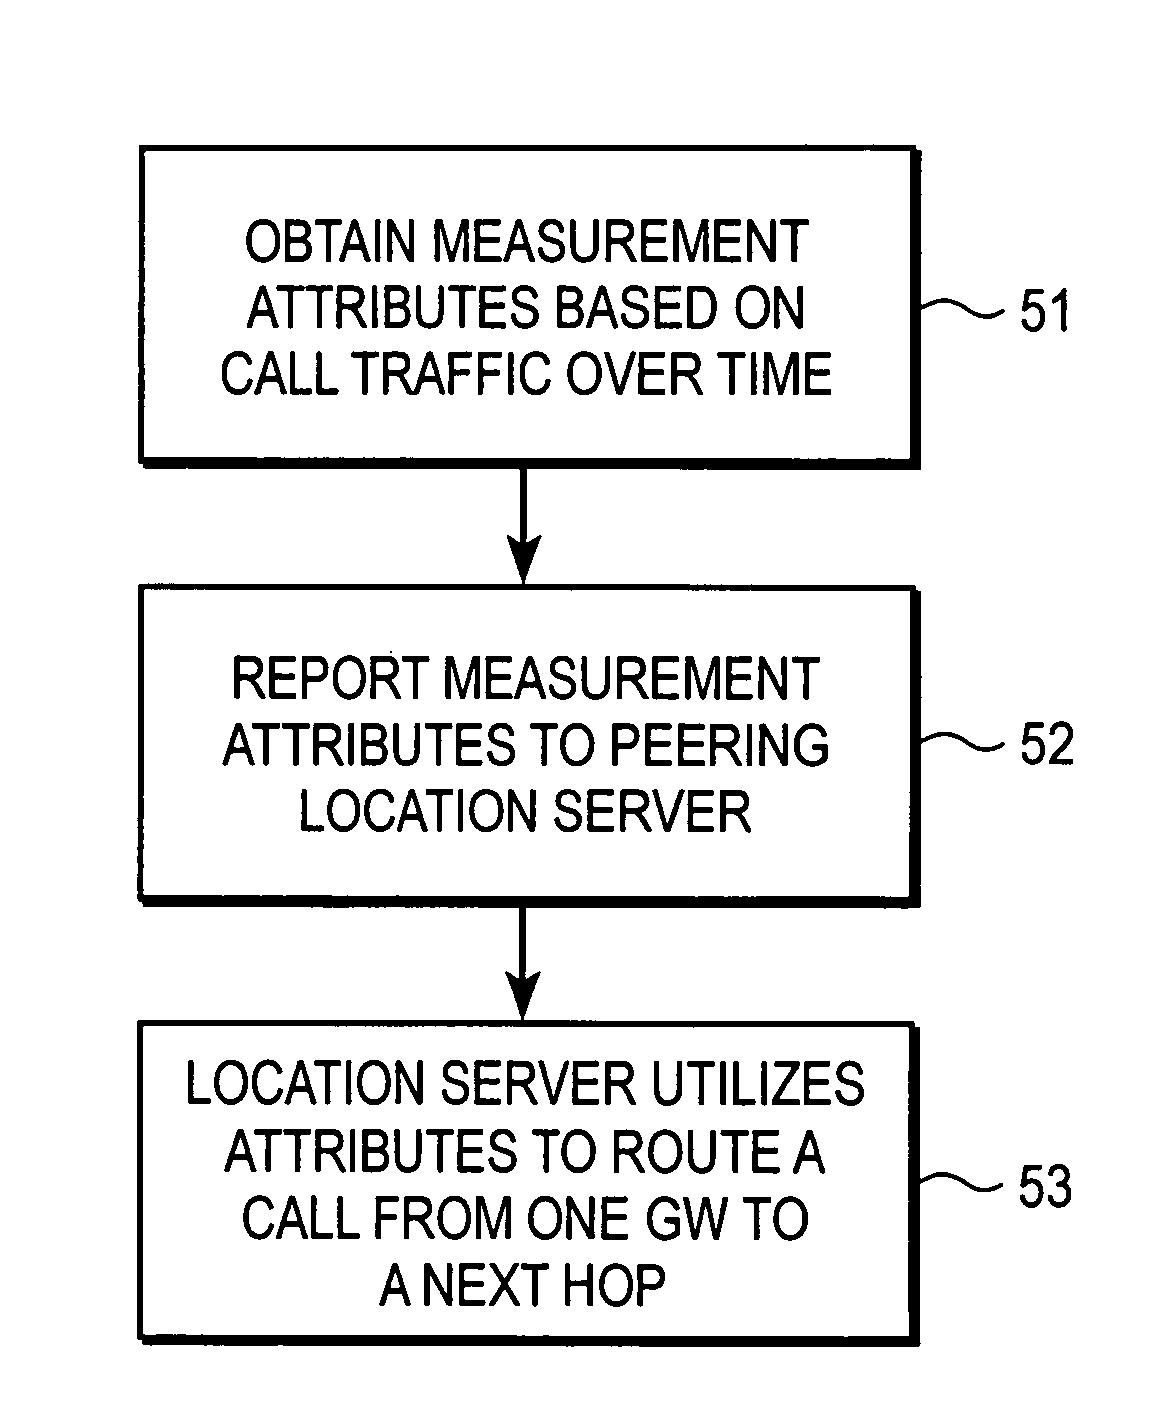 Routing protocol with packet network attributes for improved route selection